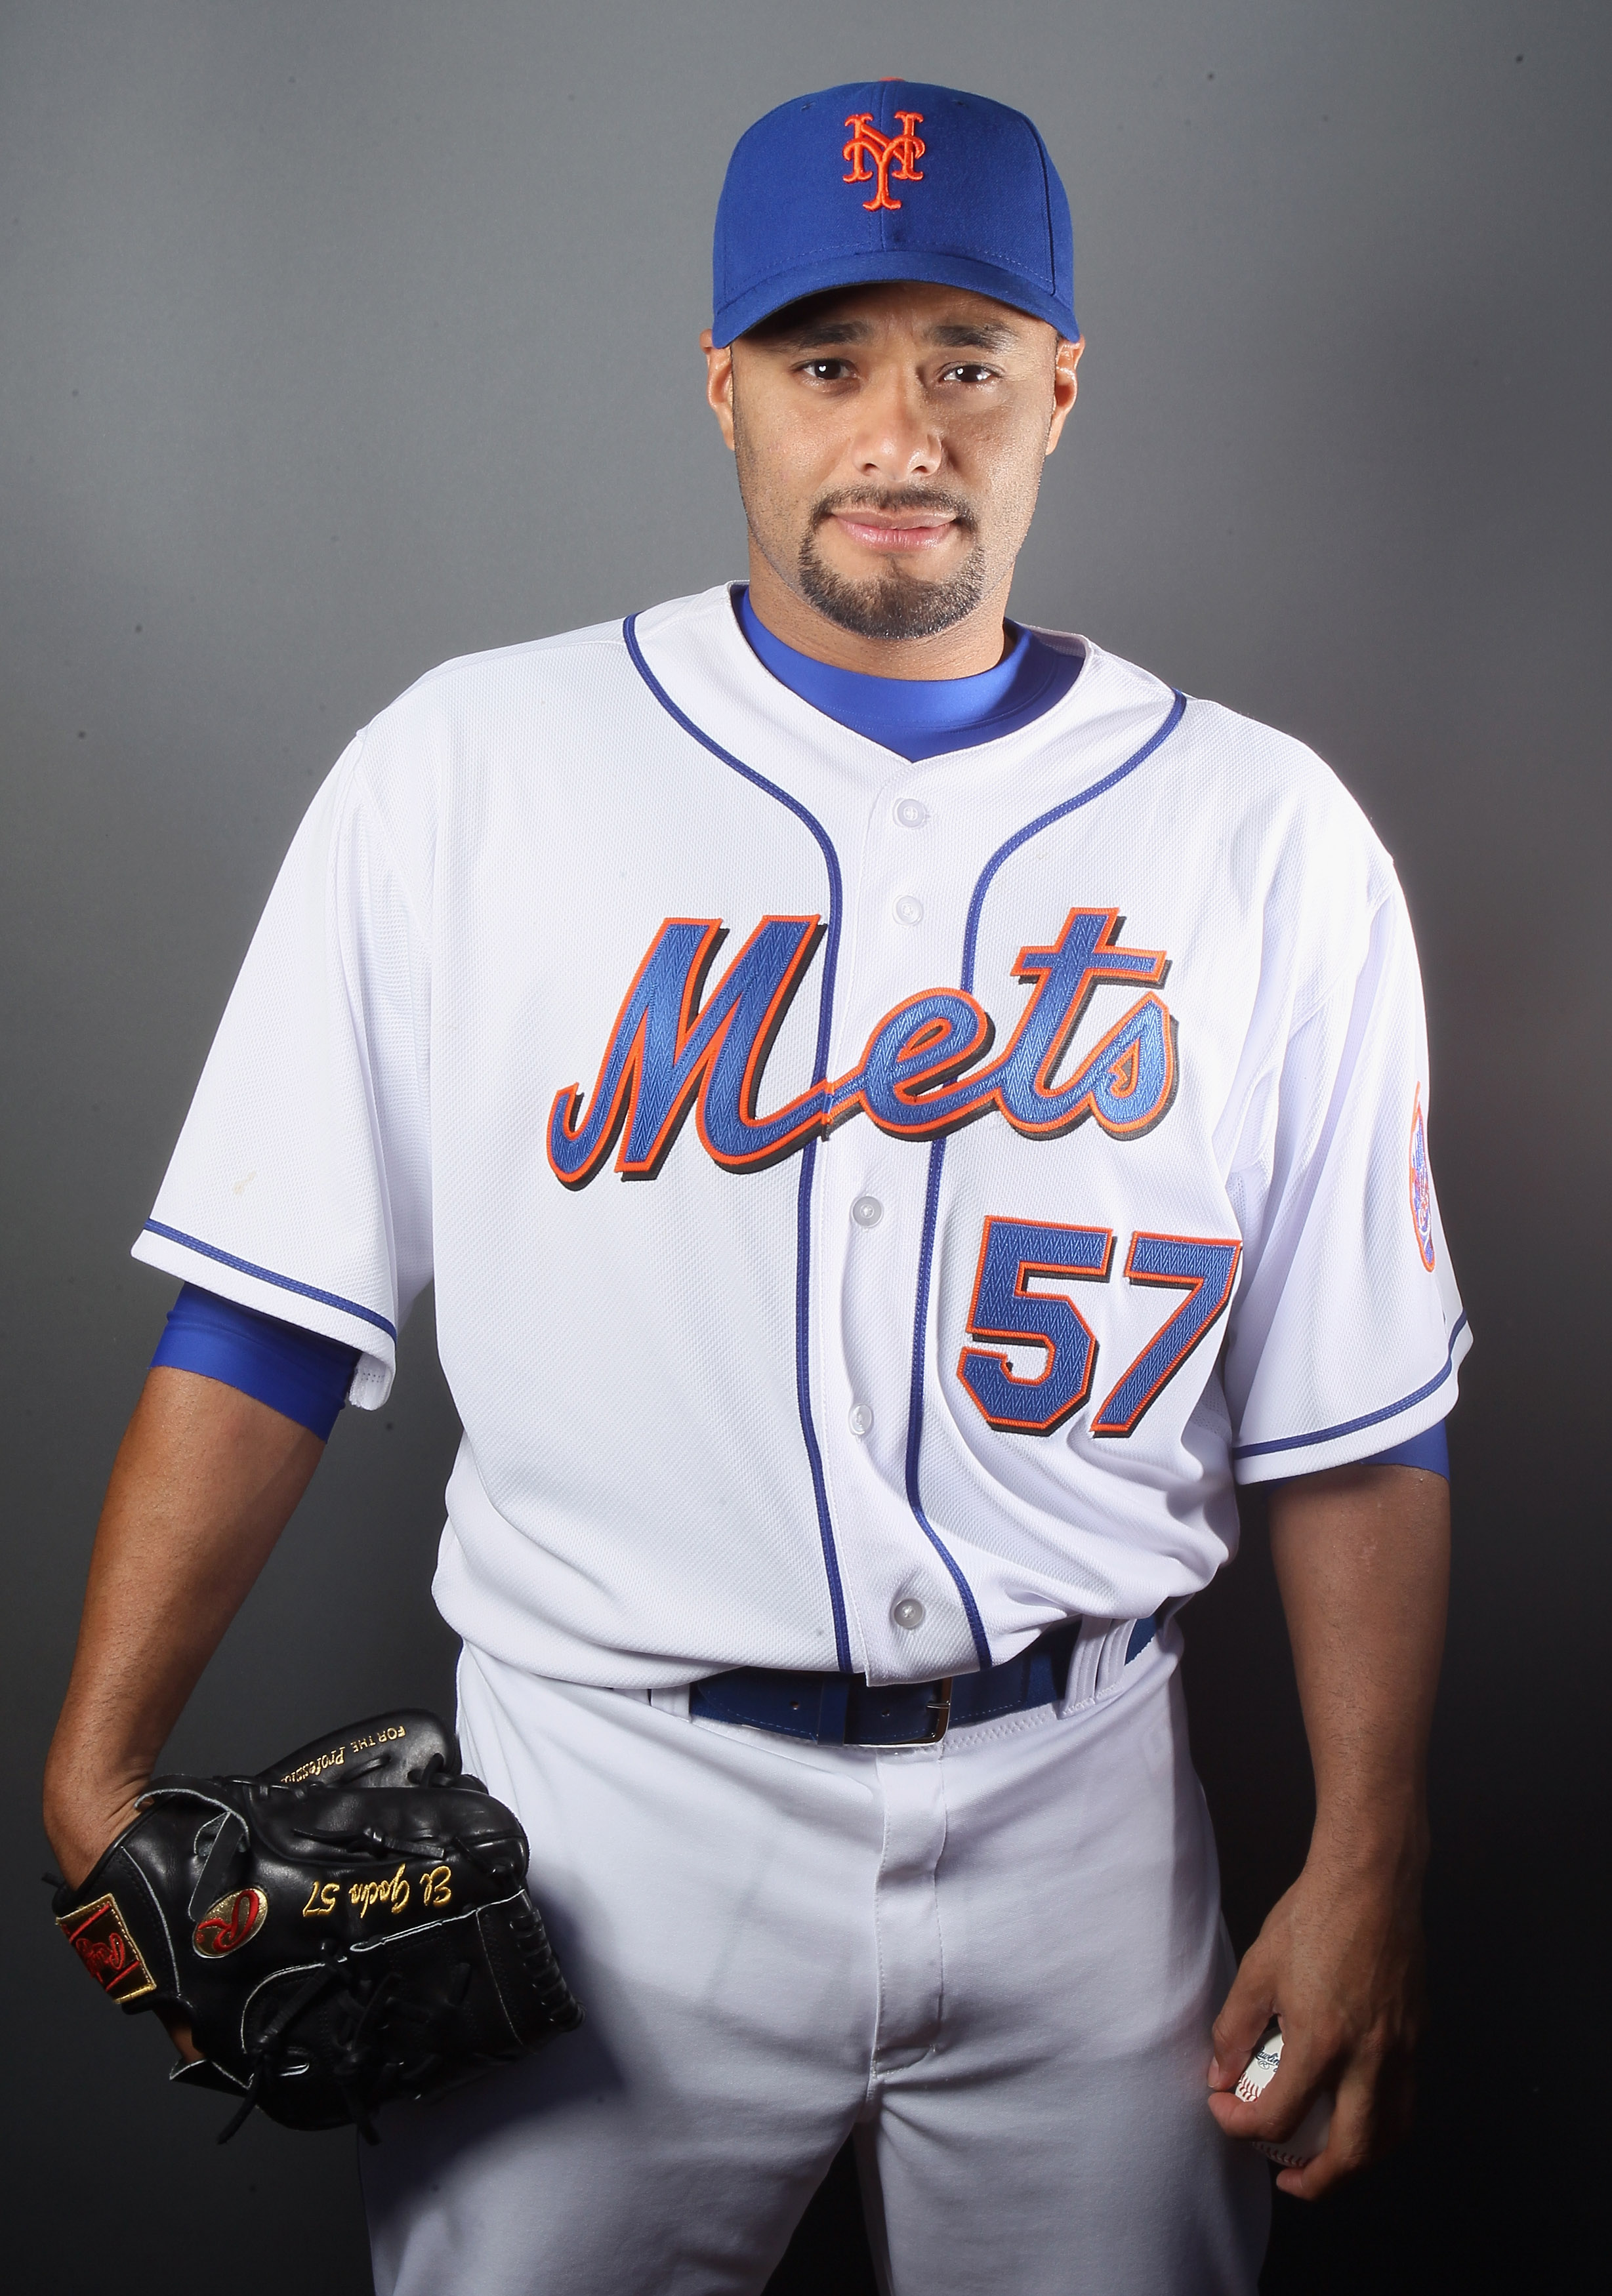 PORT ST. LUCIE, FL - FEBRUARY 24:  Johan Santana #57 of the New York Mets poses for a portrait during the New York Mets Photo Day on February 24, 2011 at Digital Domain Park in Port St. Lucie, Florida.  (Photo by Elsa/Getty Images)